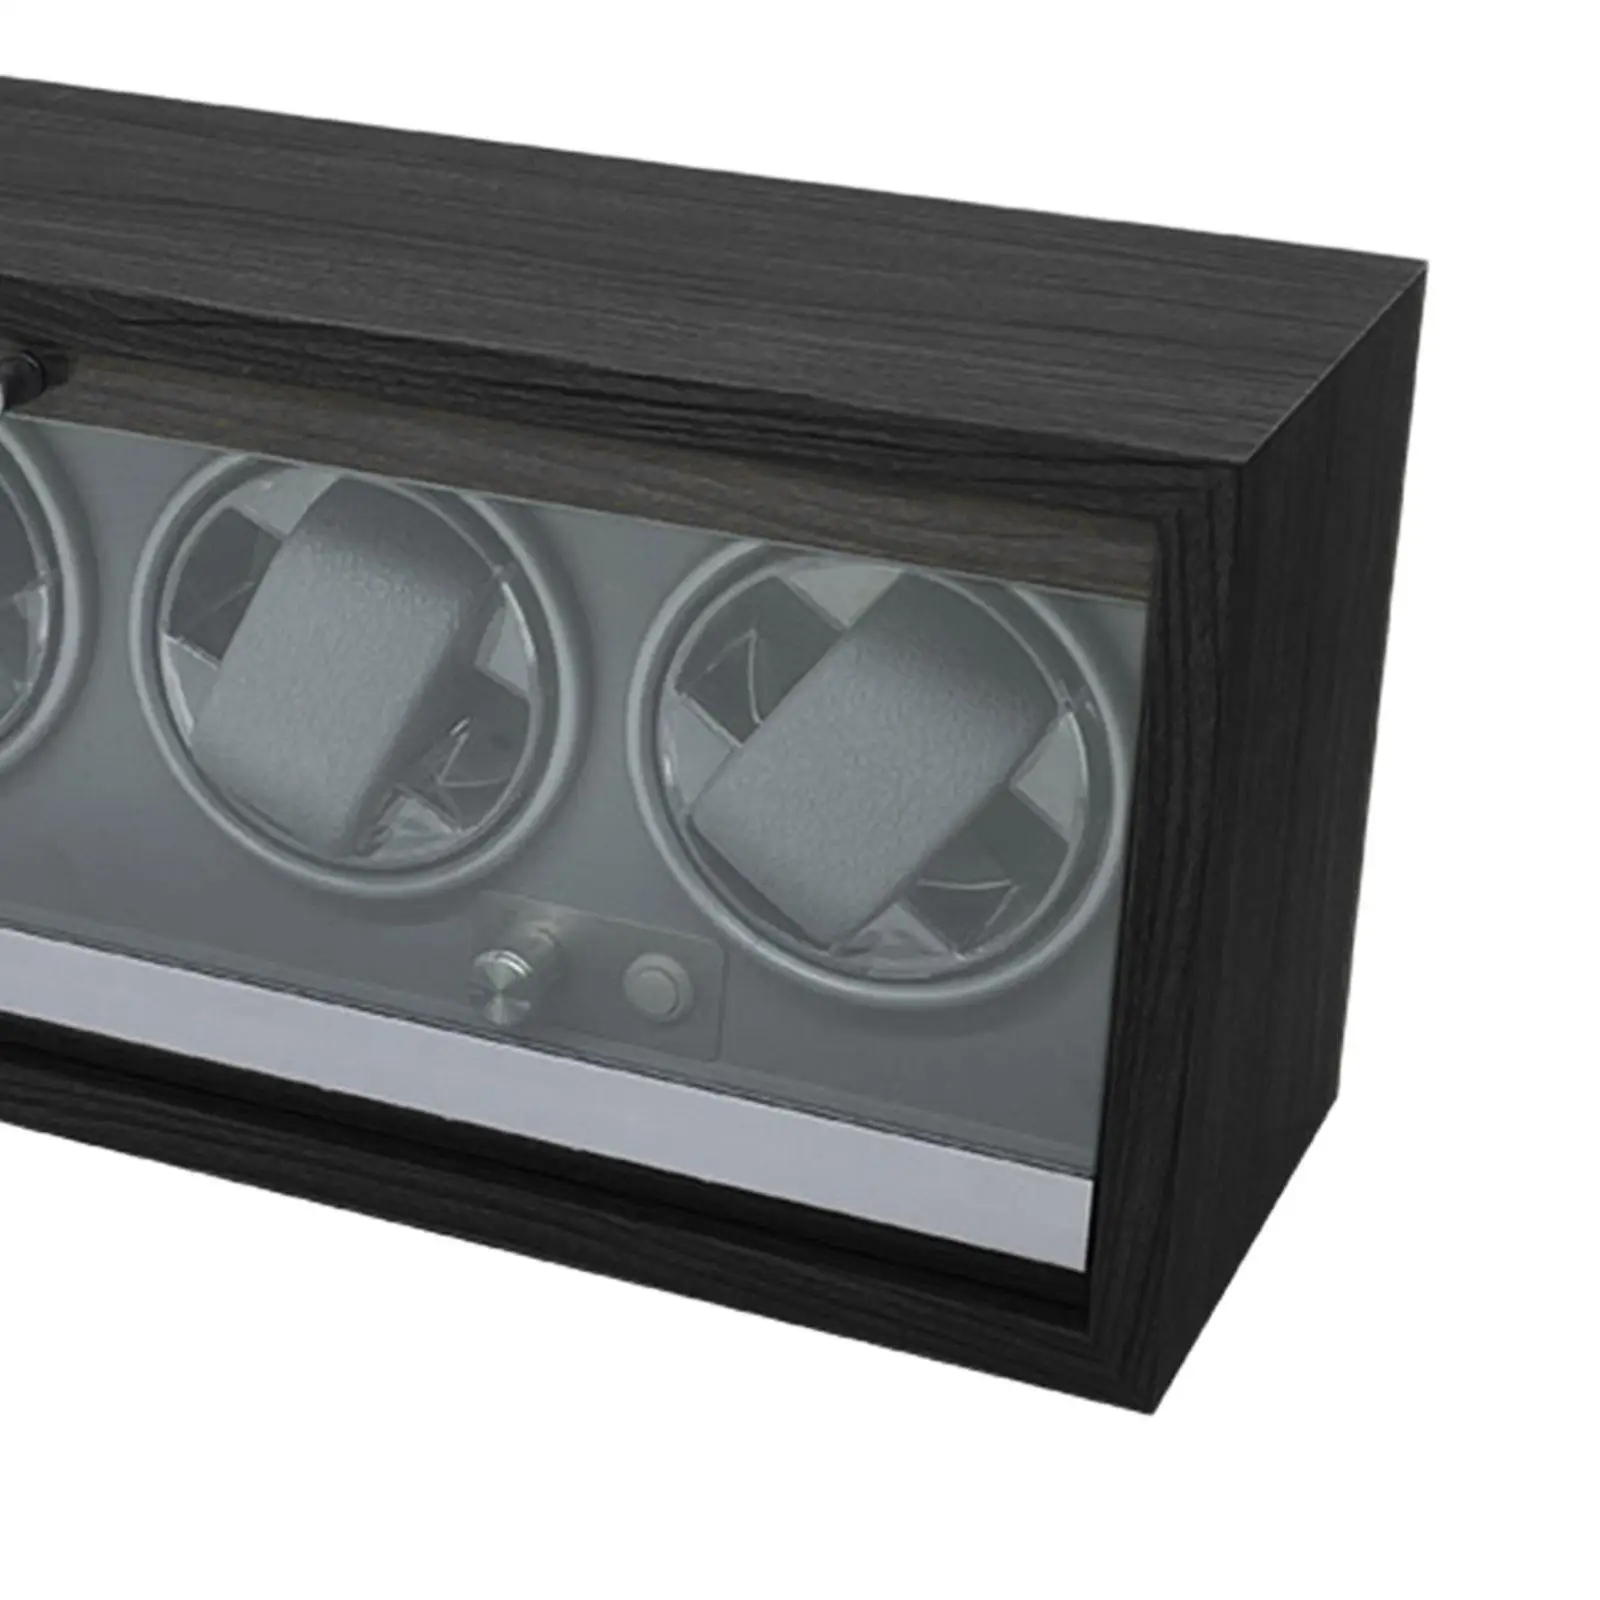 Watch Winder Box Watches Rotating Holder Stand Mechanical Rotating Box Quiet Motor Electric Watch Winder for Mechanical Watches